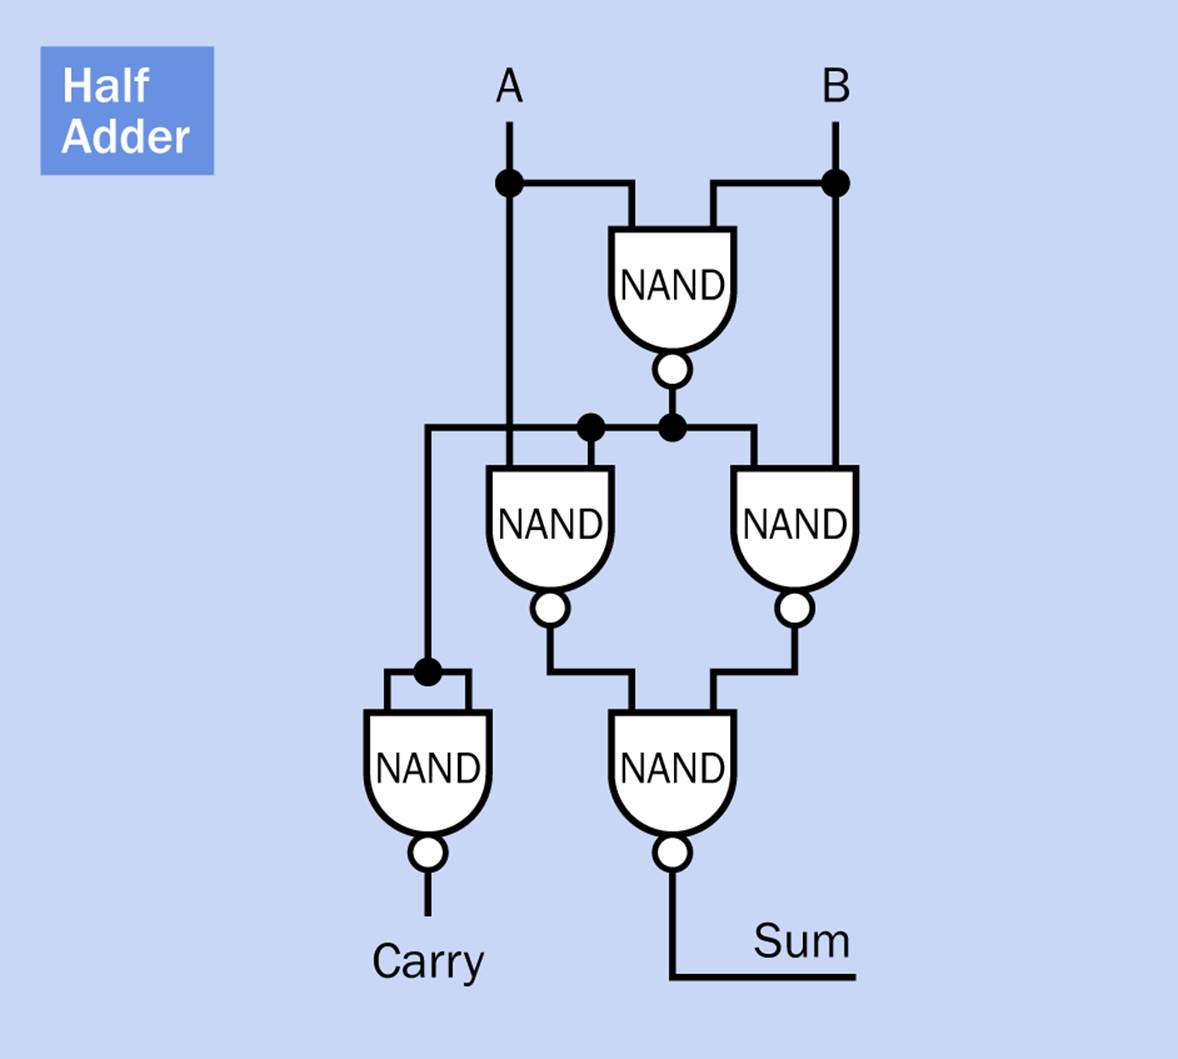 A half adder can be constructed entirely from NAND gates.